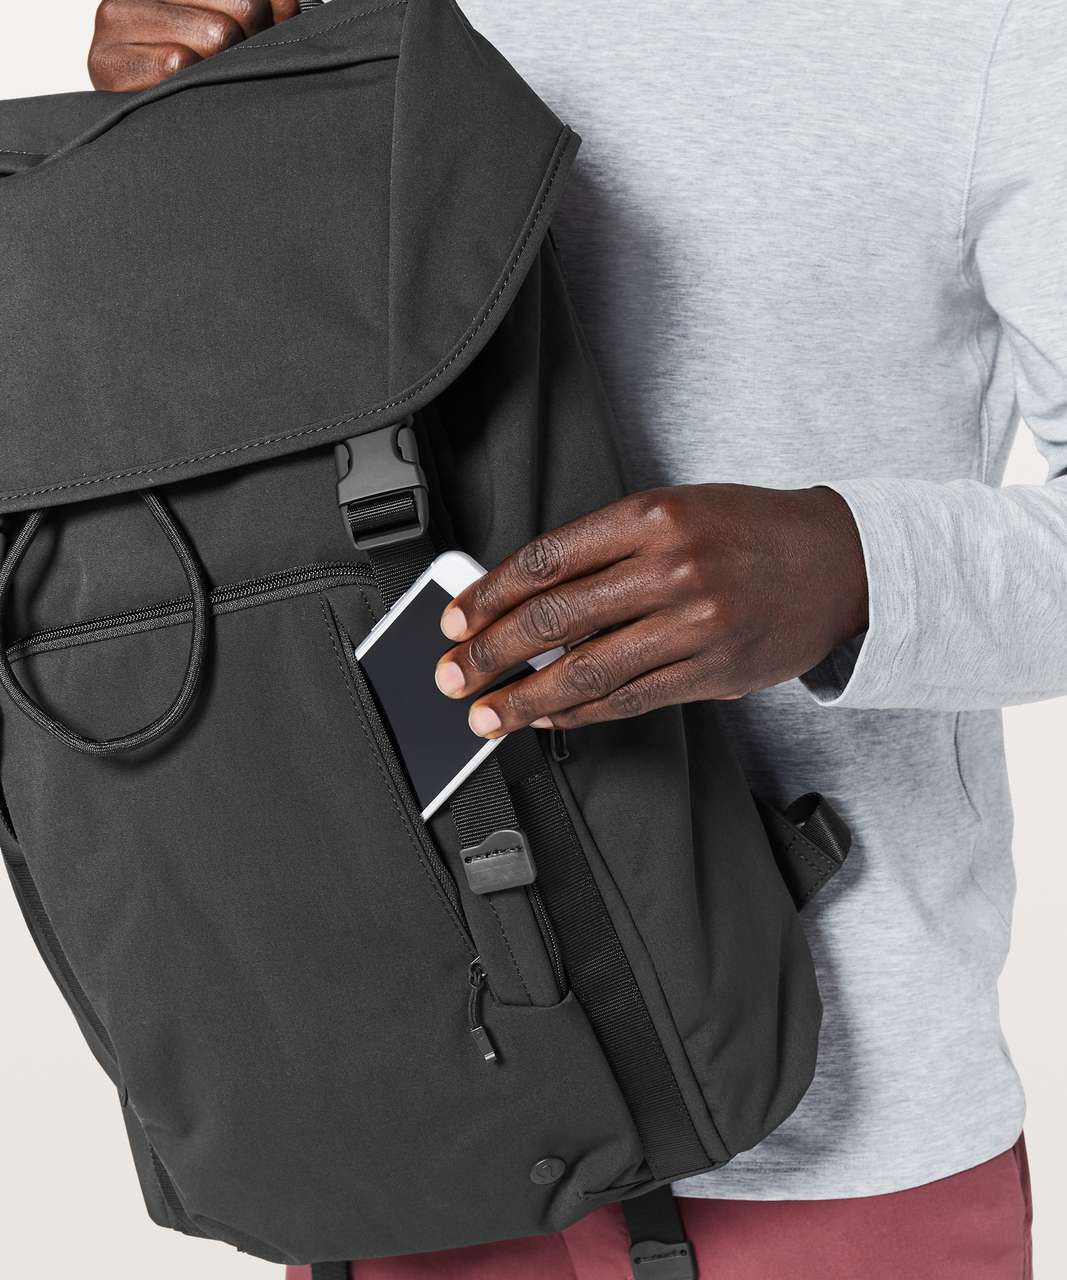 lululemon command the day commute bag review